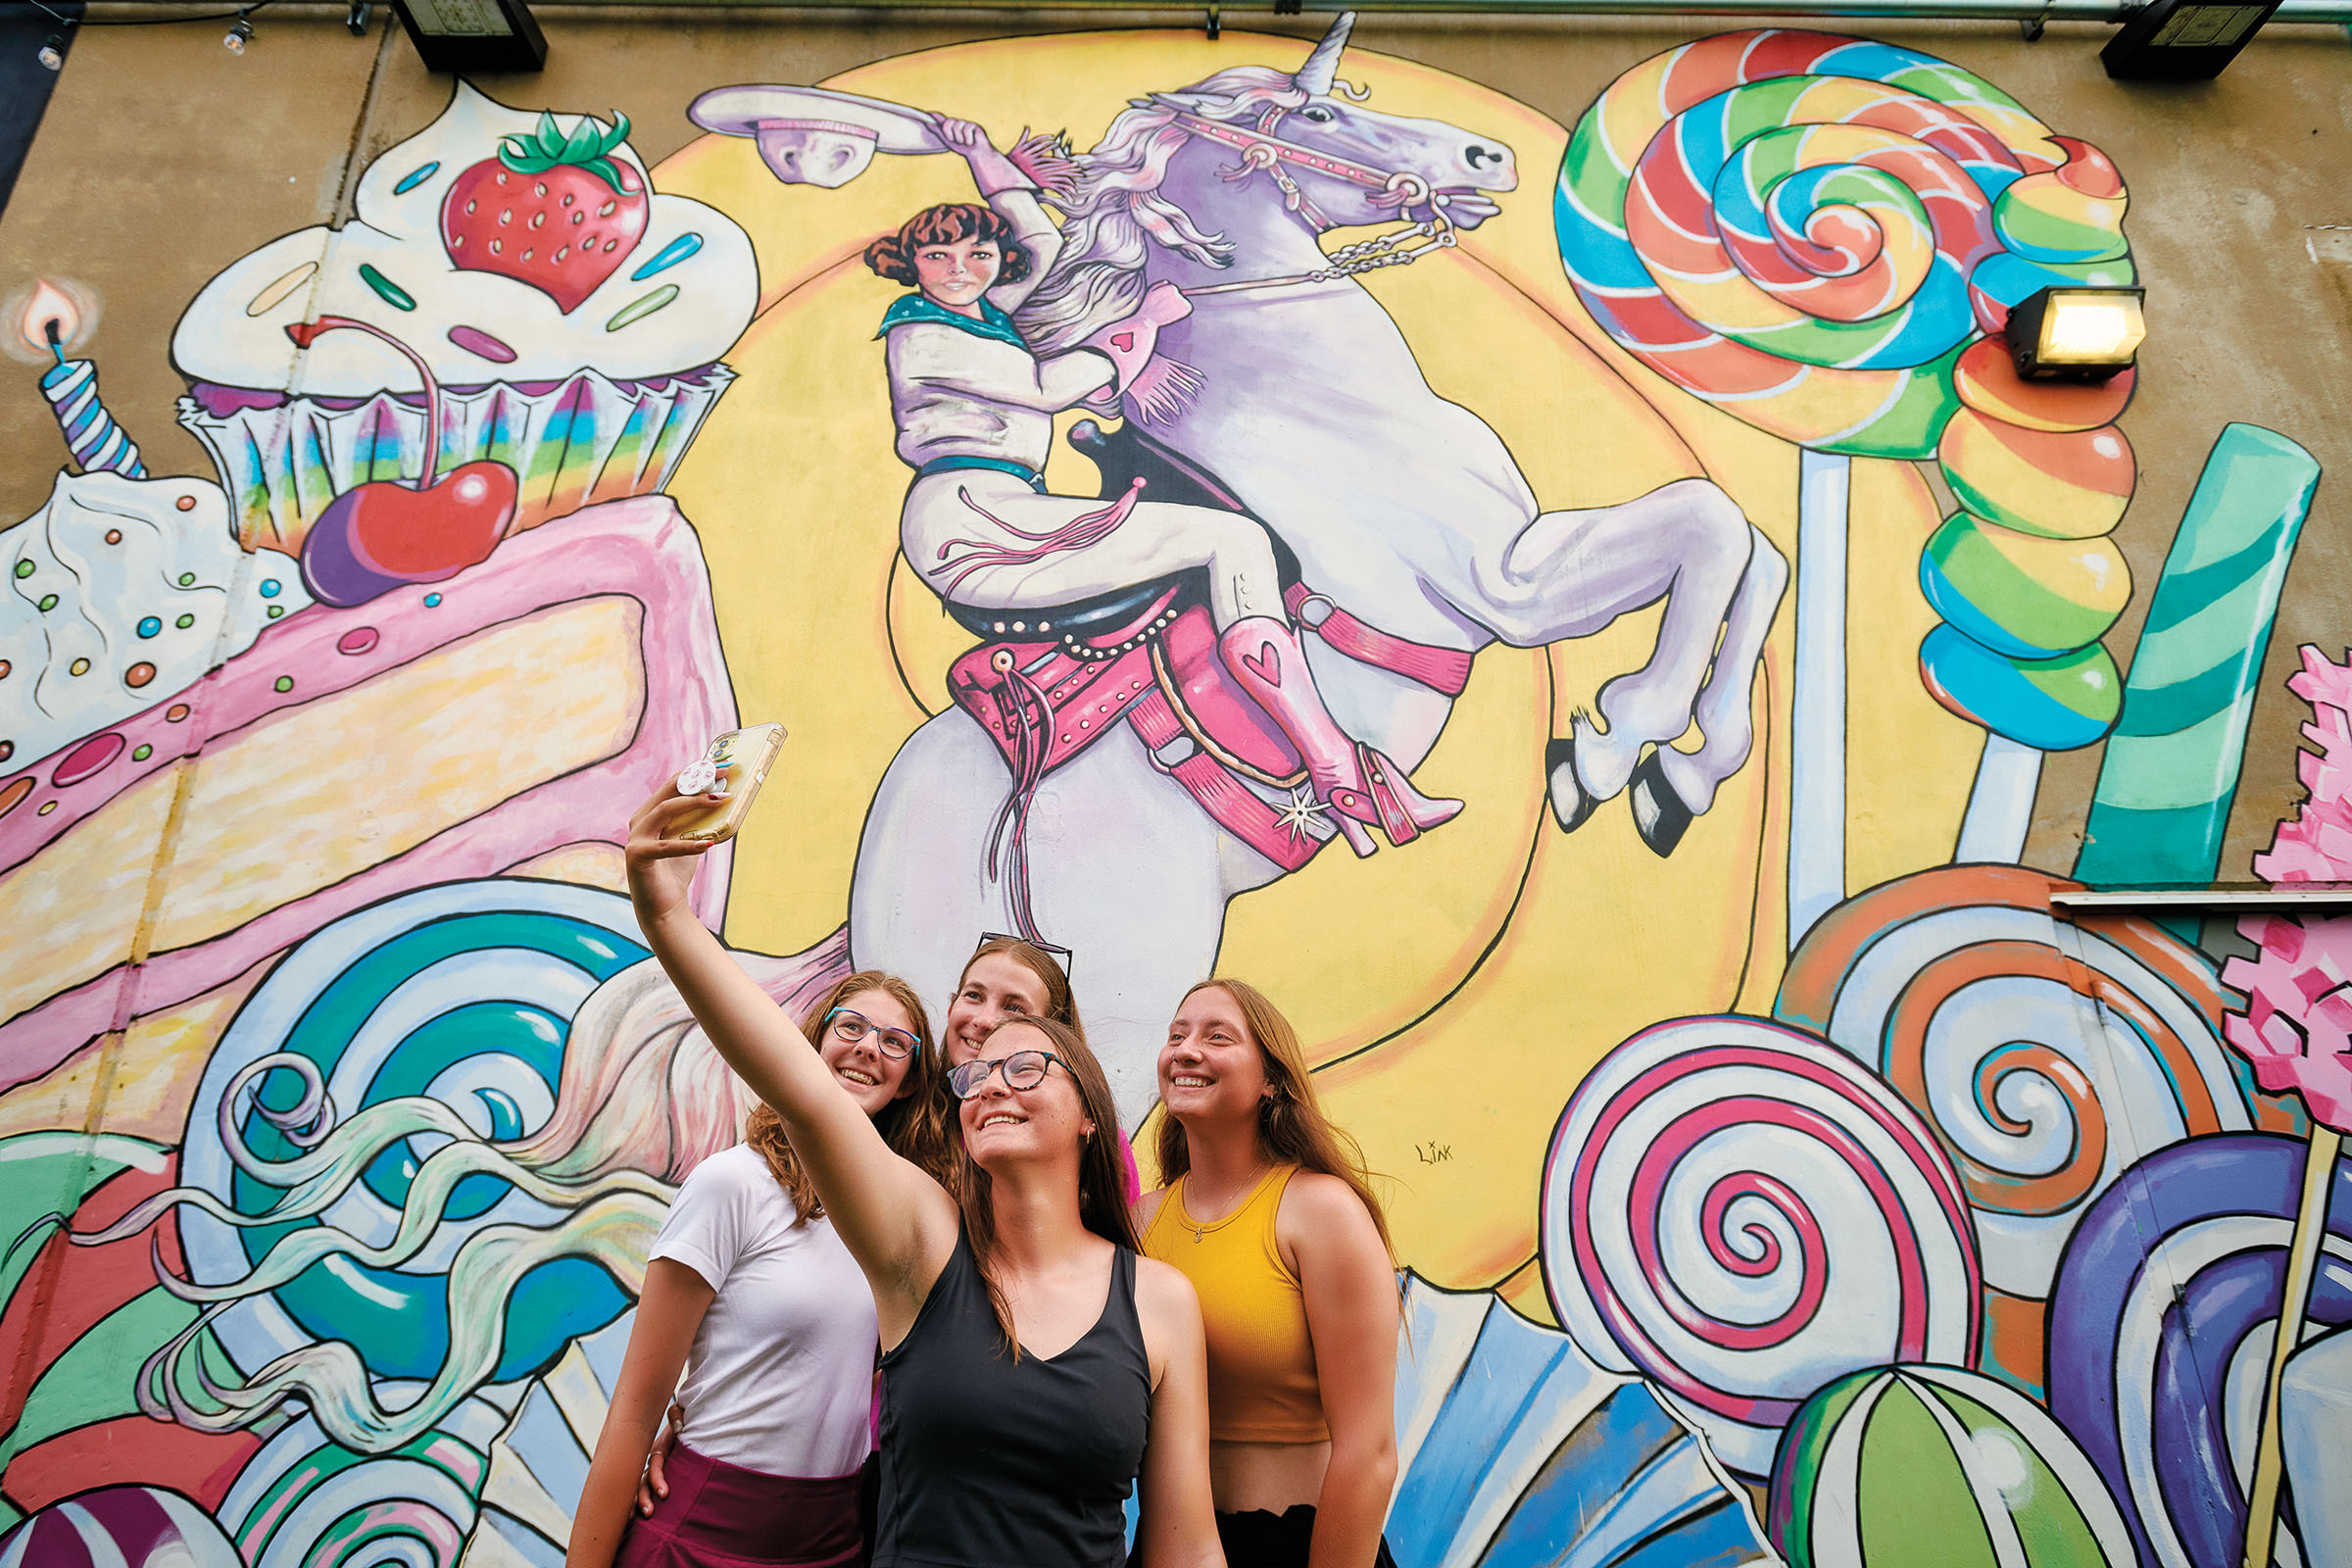 A group of people pose for a selfie in front of a brighty colored mural